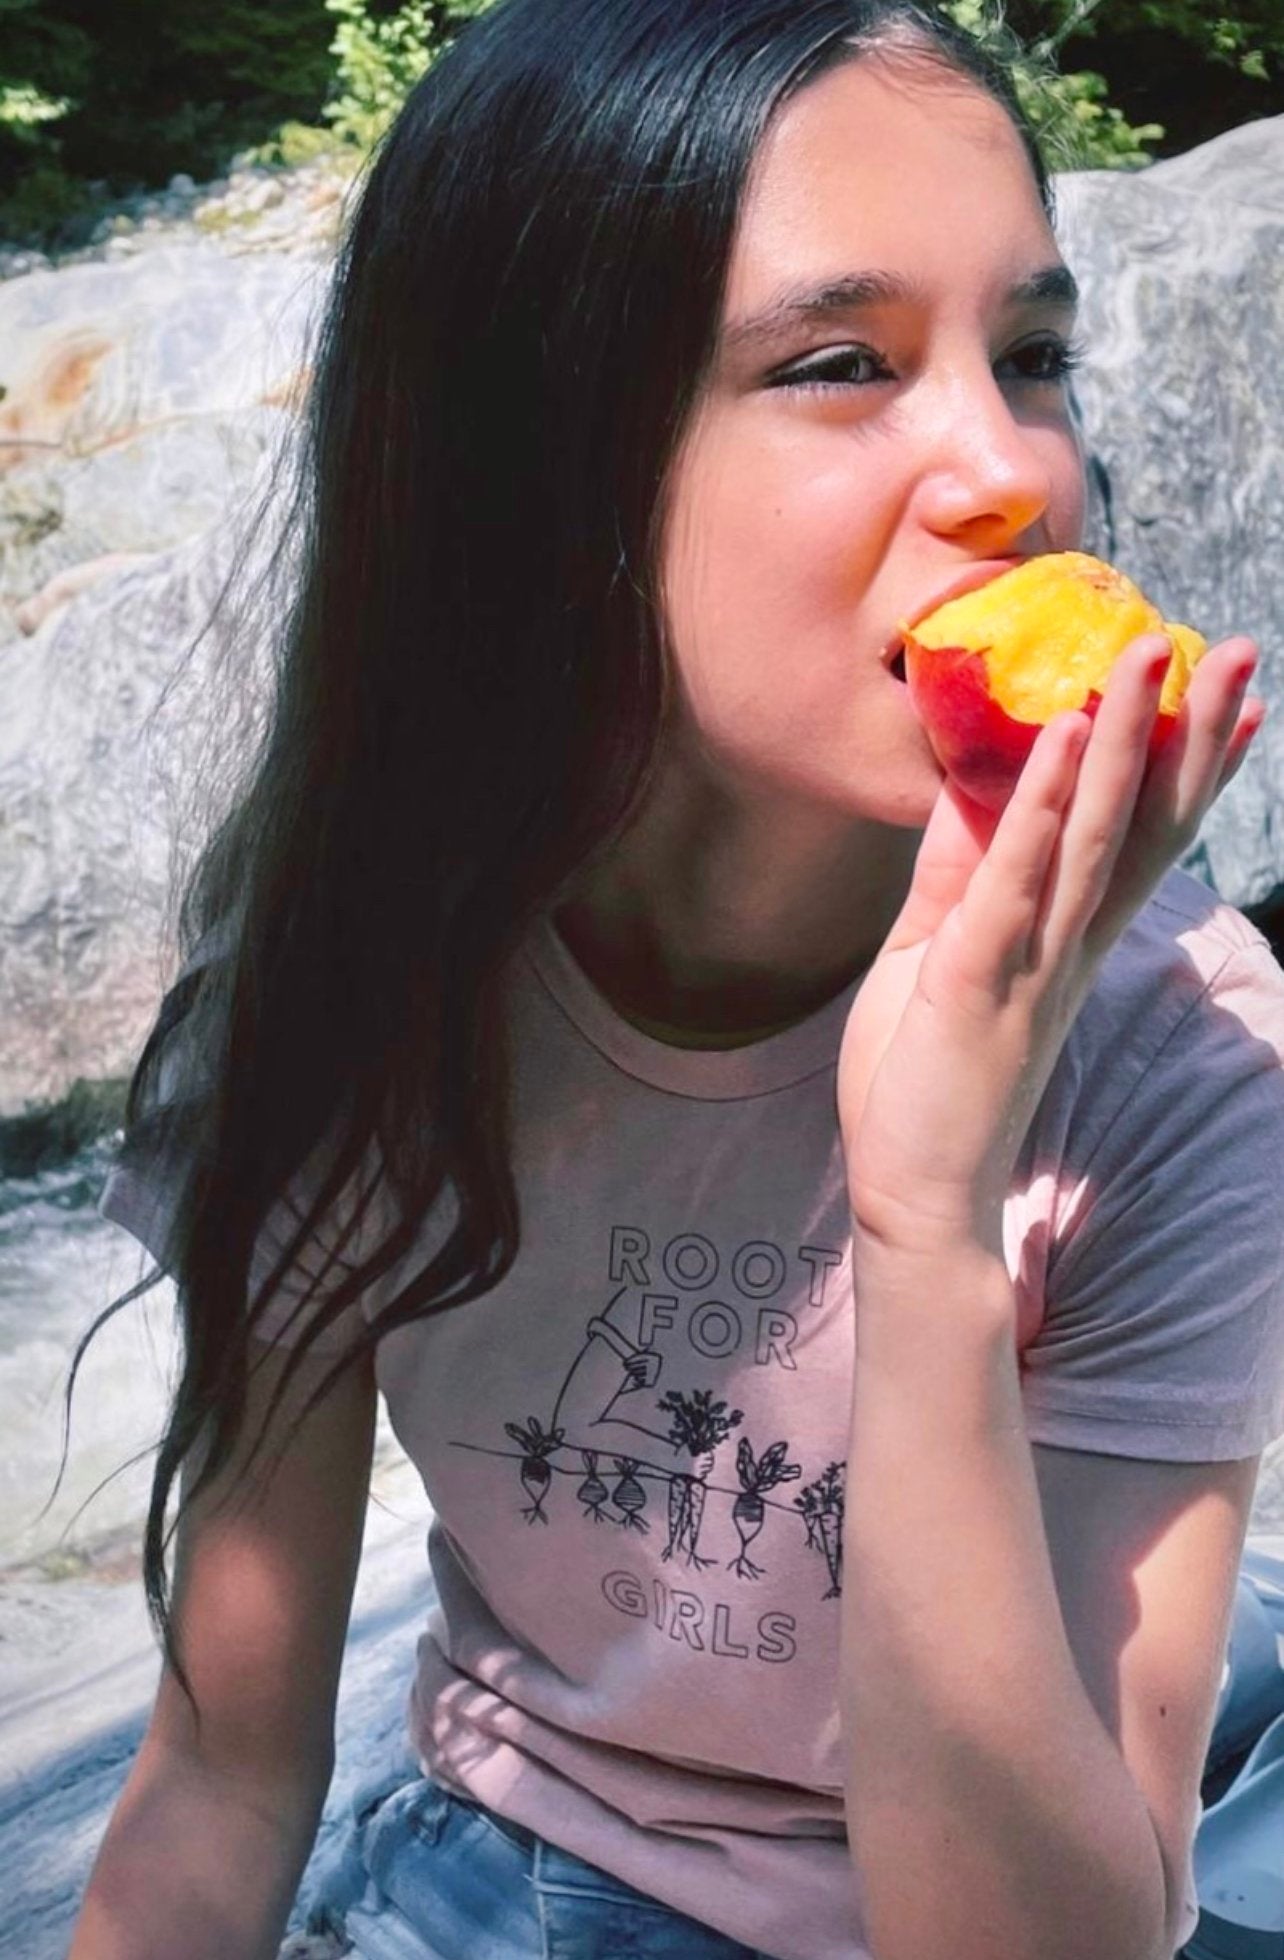 A girl wears a pink tee that reads "Root for Girls" and eats a peach